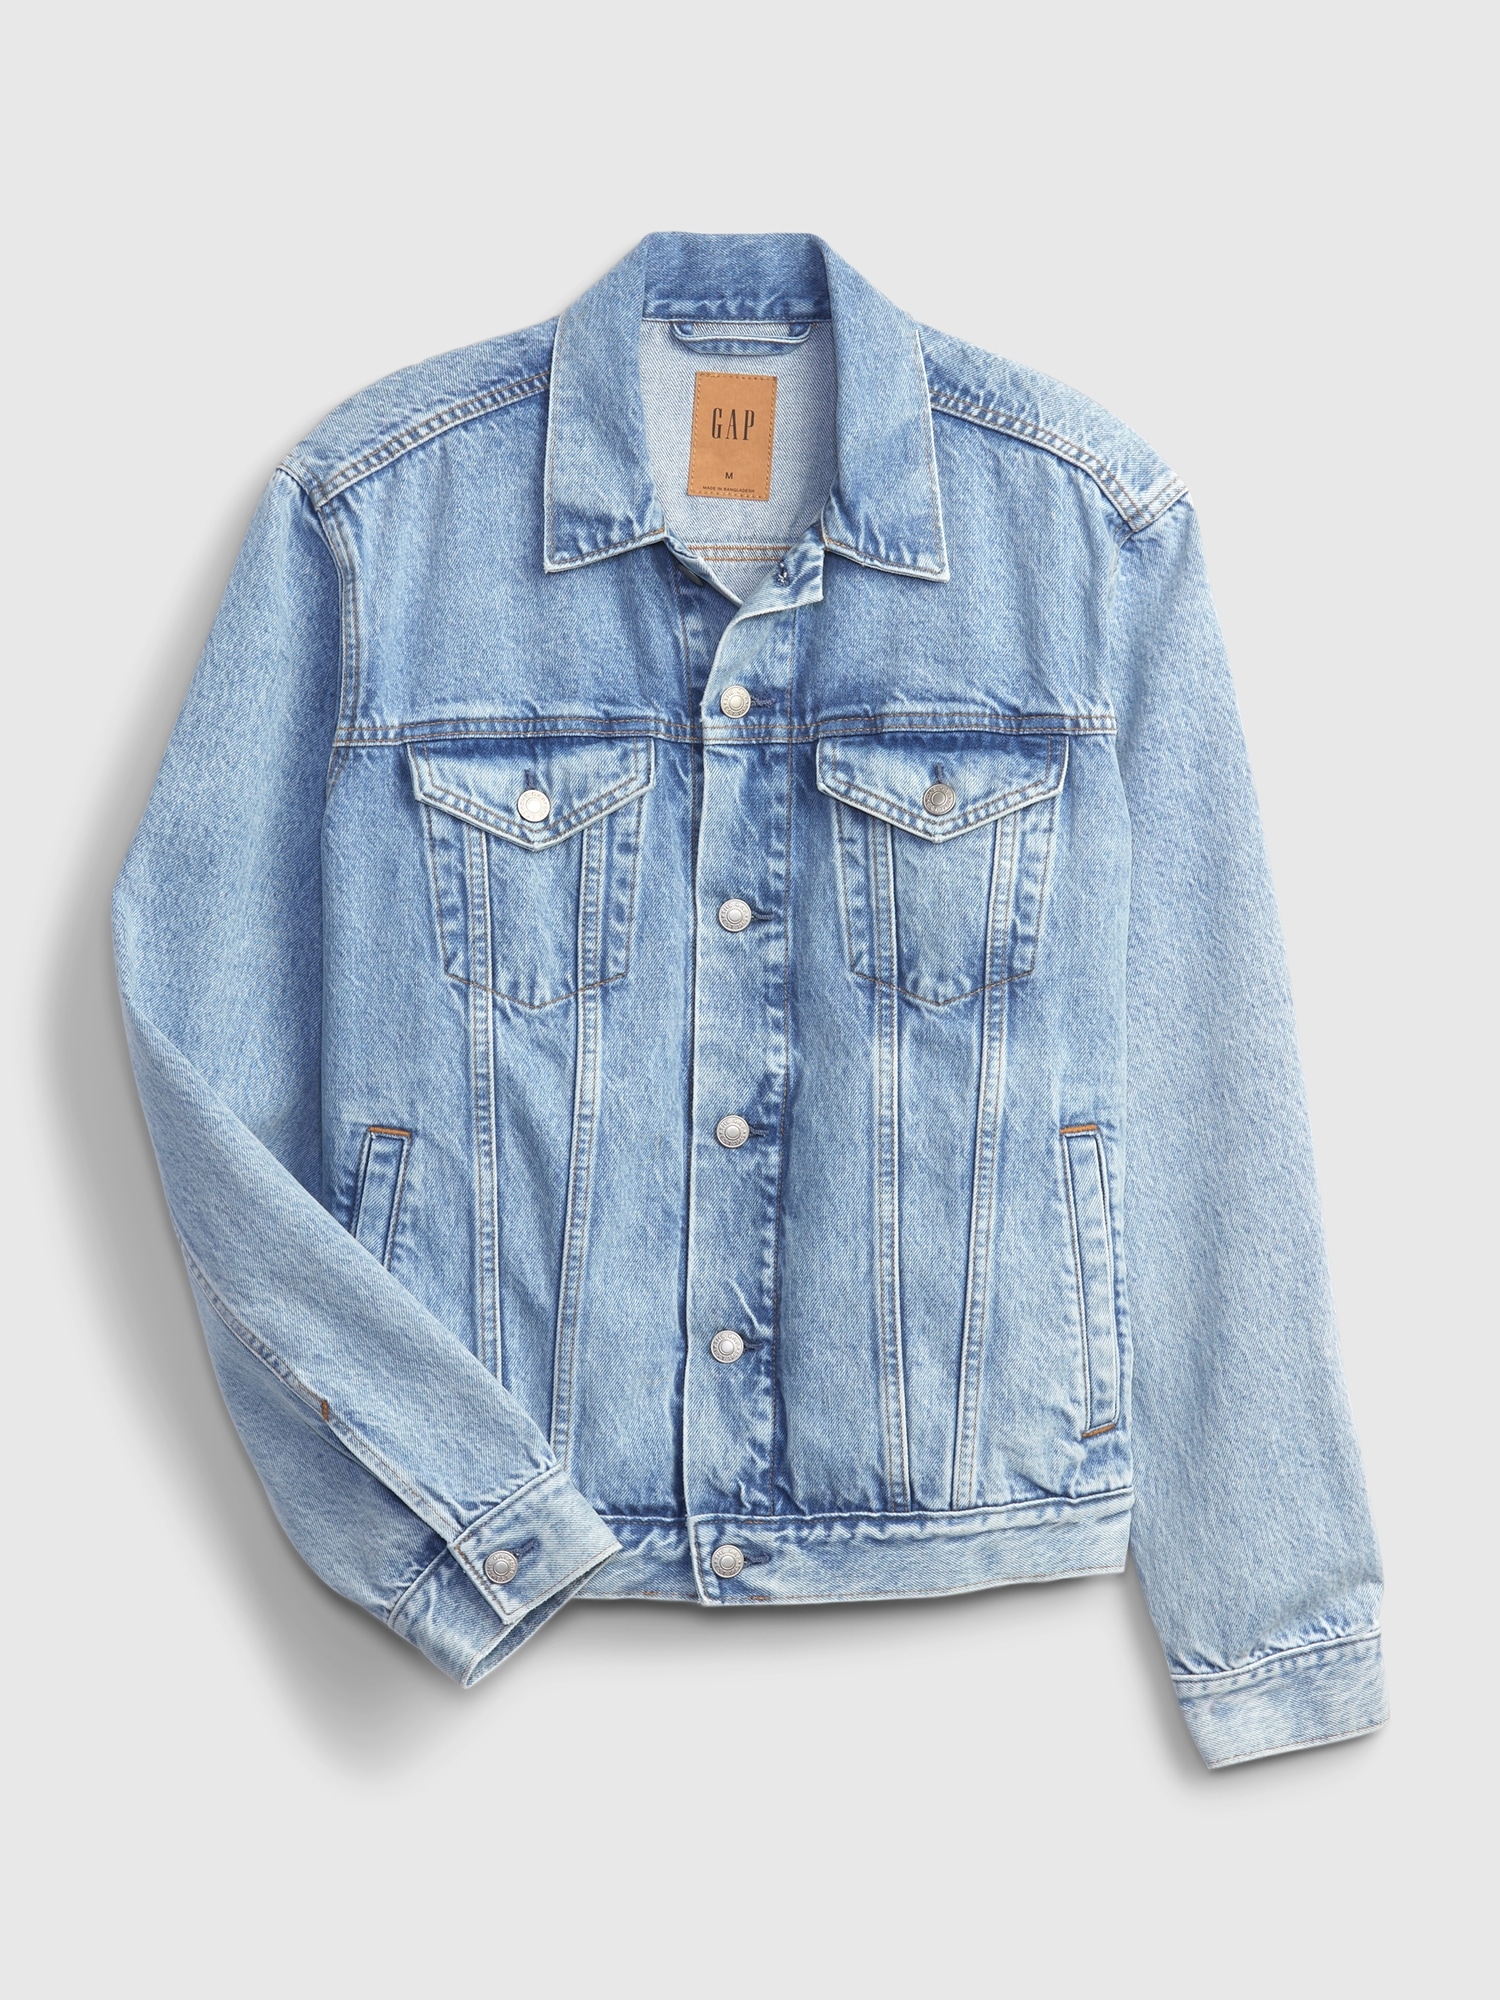 Women's Guide: What to Wear with a Denim Jacket? - The Jacket Maker Blog